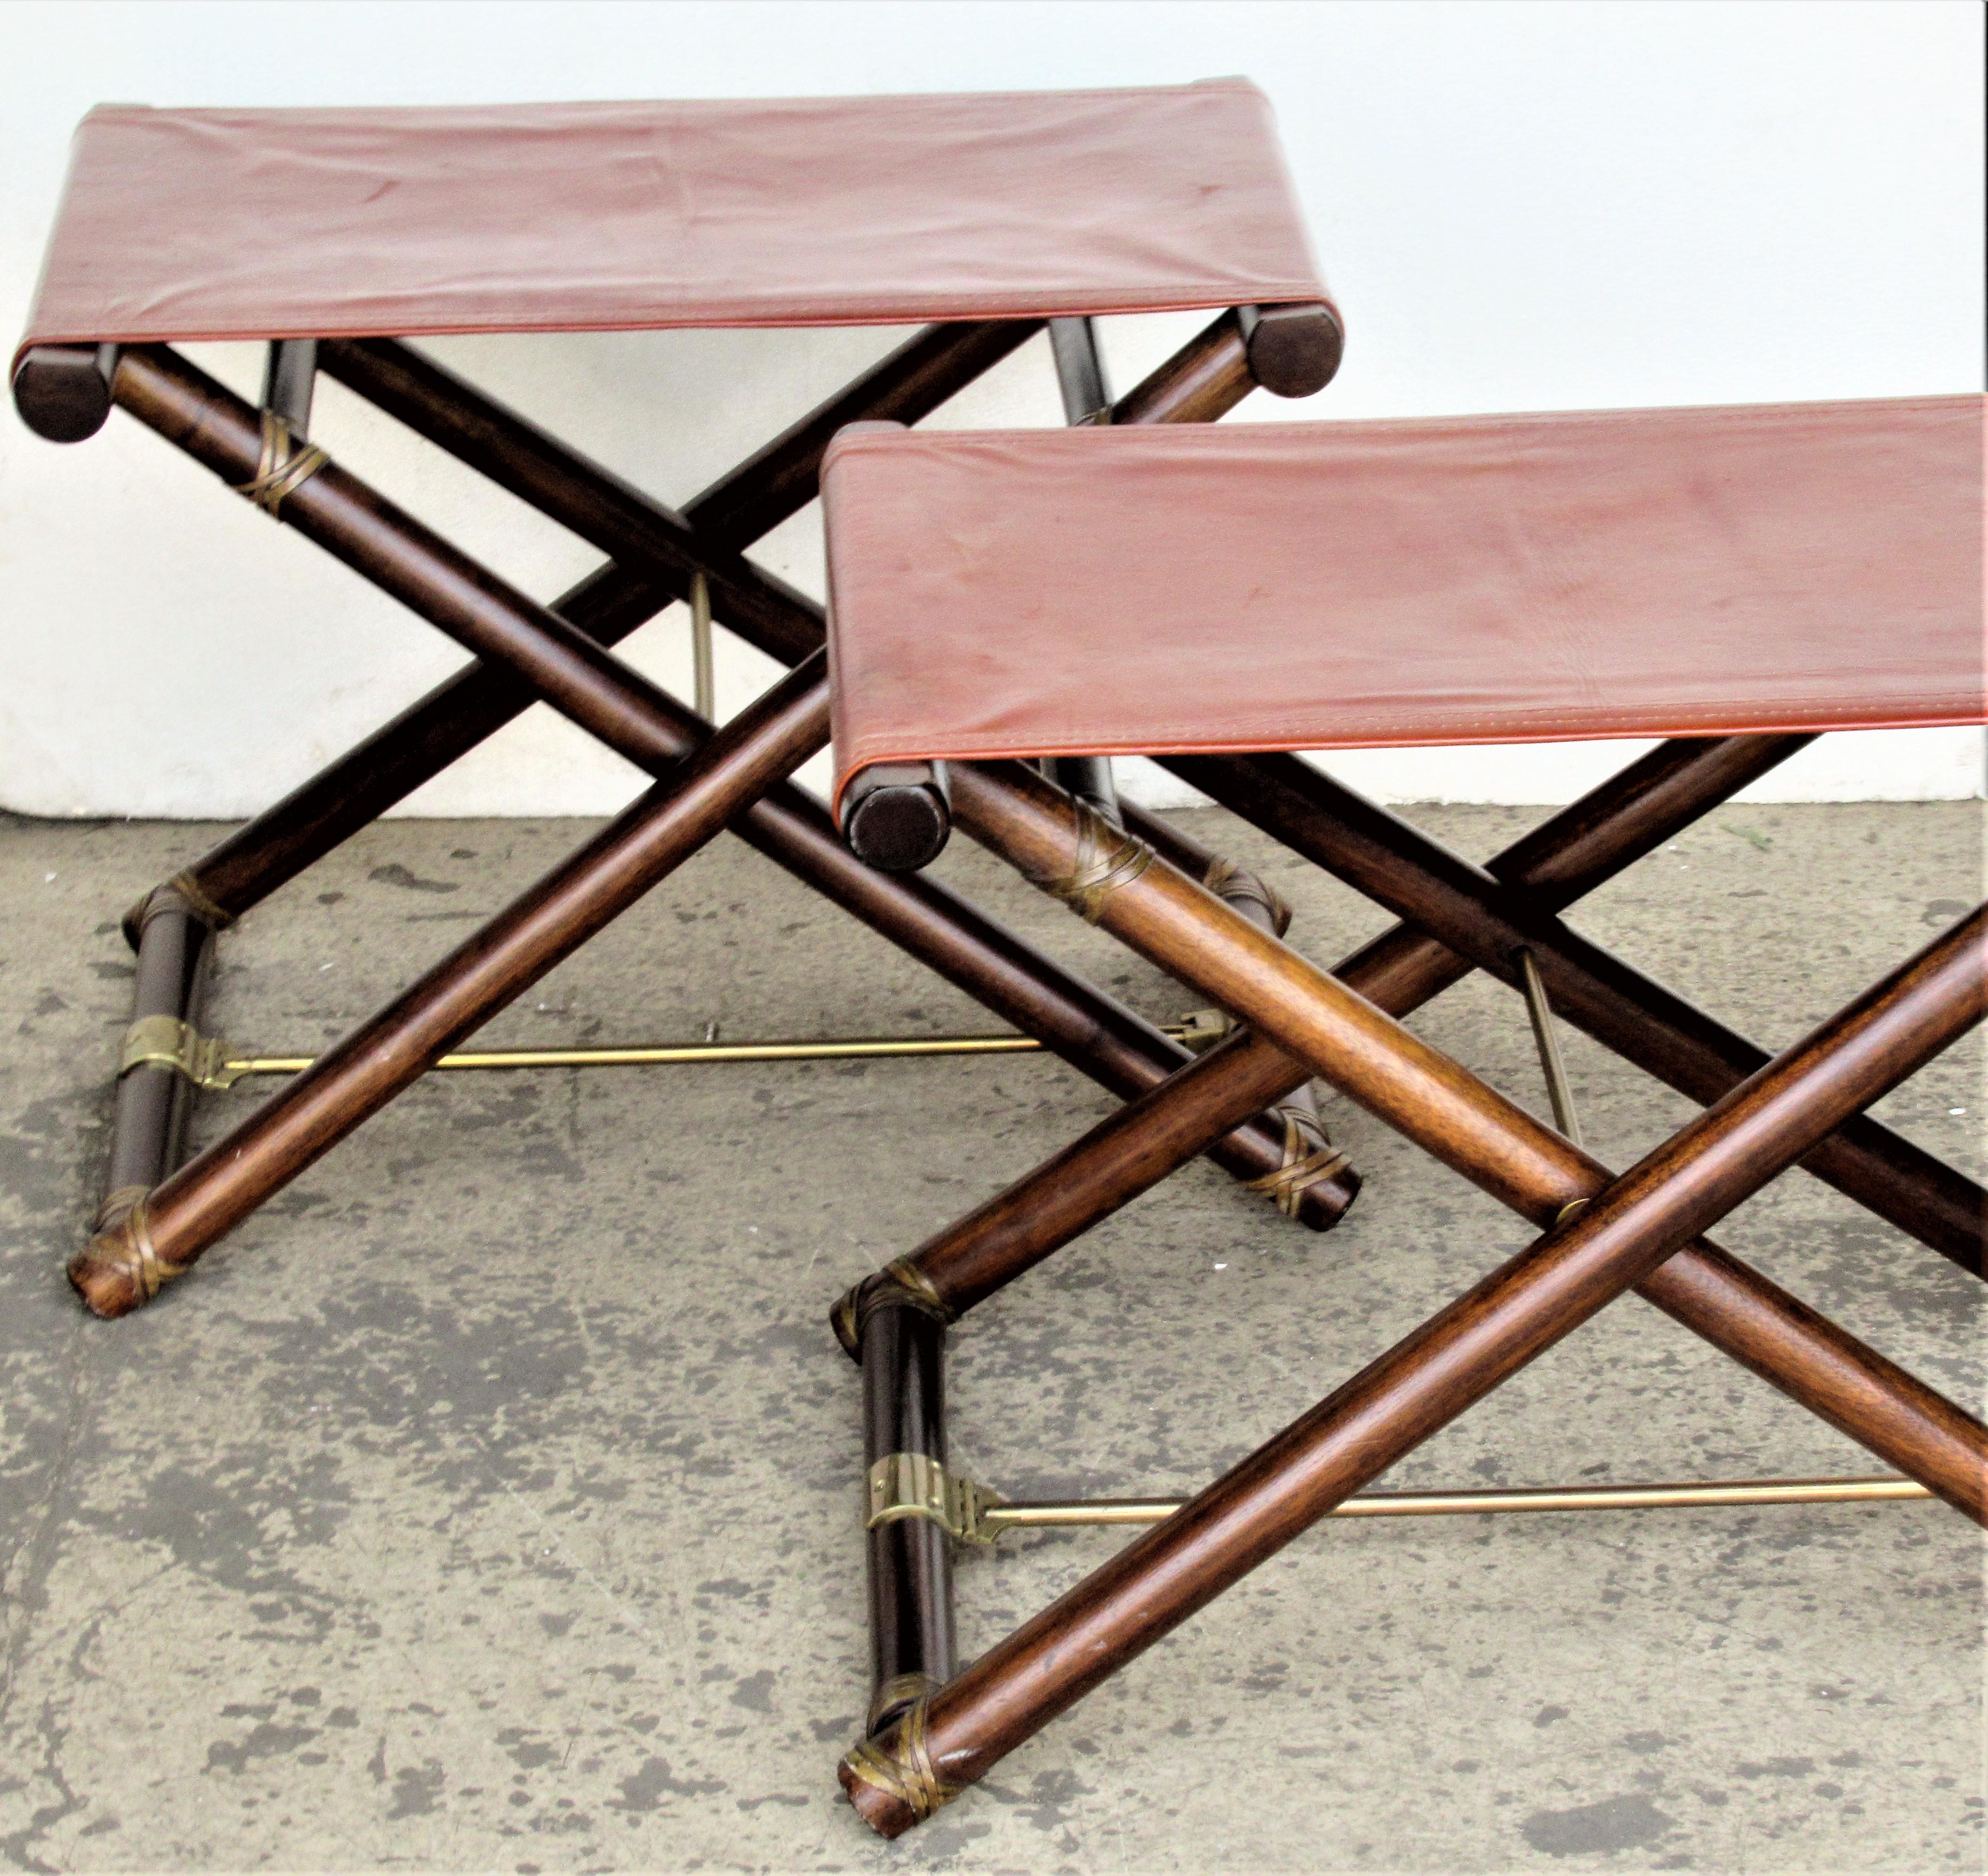 A matched pair of folding collapsible X-form campaign directors stools / ottomans by McGuire. Bamboo wood bases / rawhide bindings / brass fittings and stretchers, stitched leather seats. Brass tags - McGuire San Fancisco /paper labels - Made by the